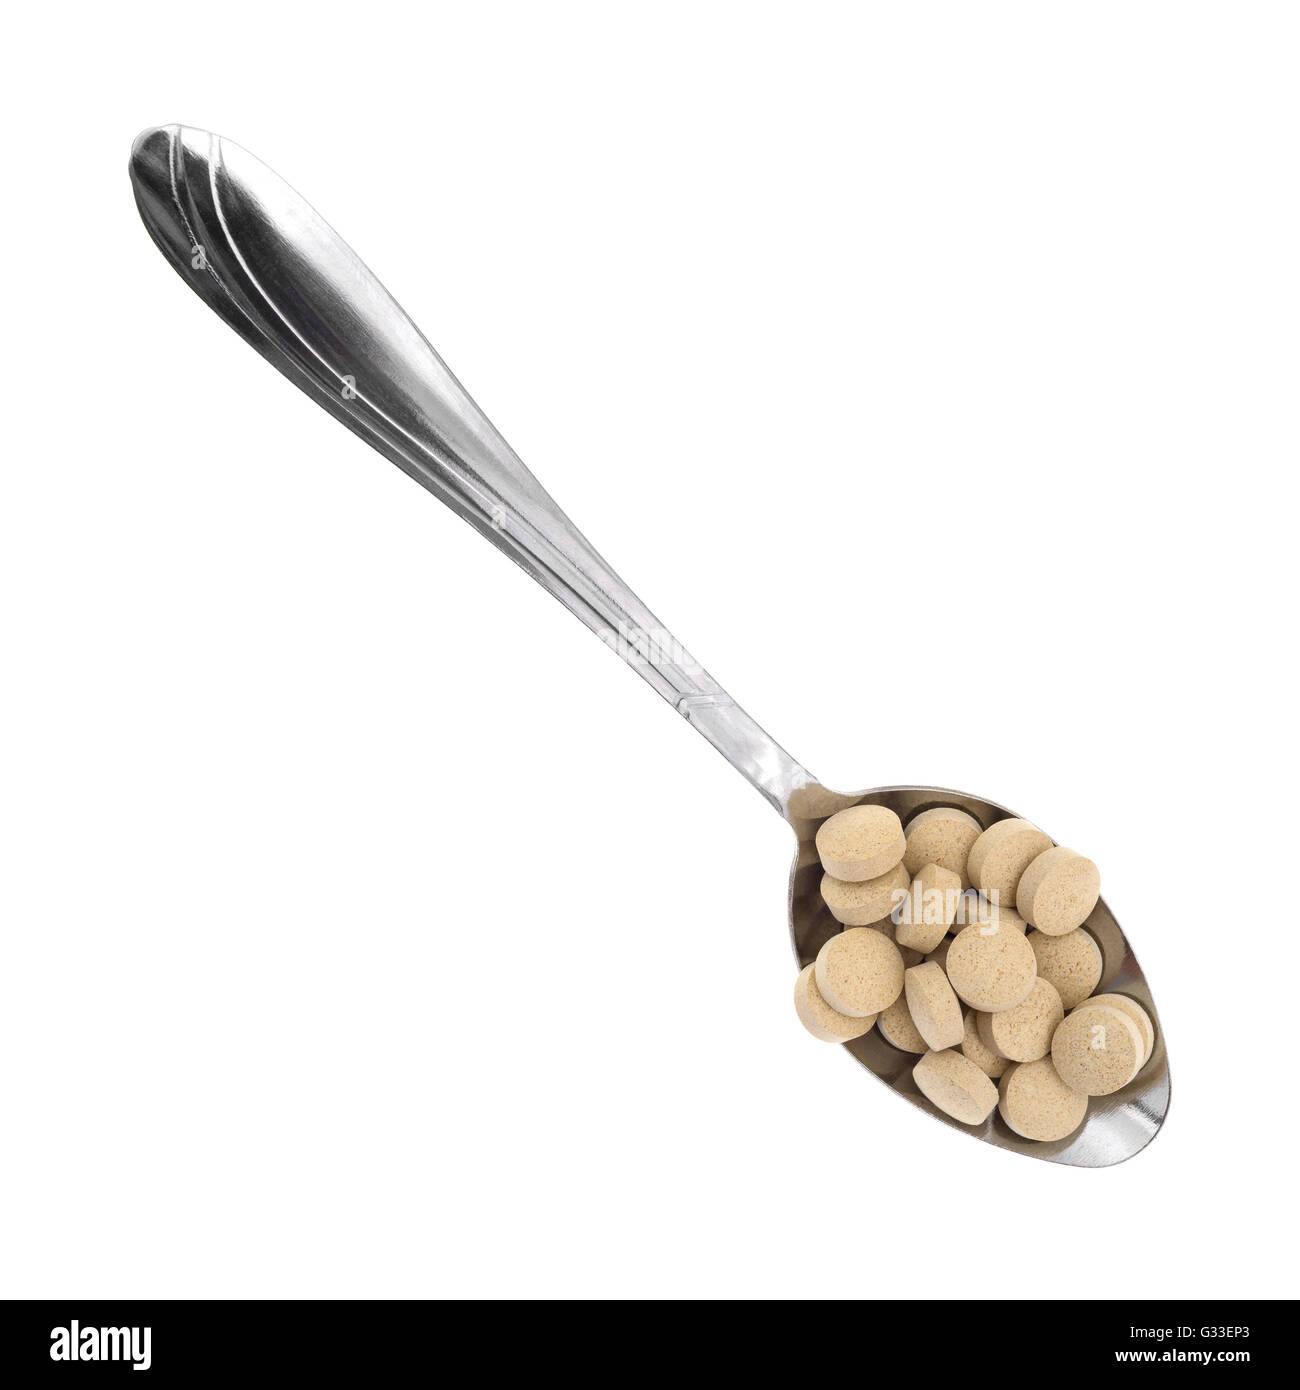 Top view of a metal spoon filled with brewer's yeast nutritional supplement tablets isolated on a white background. Stock Photo